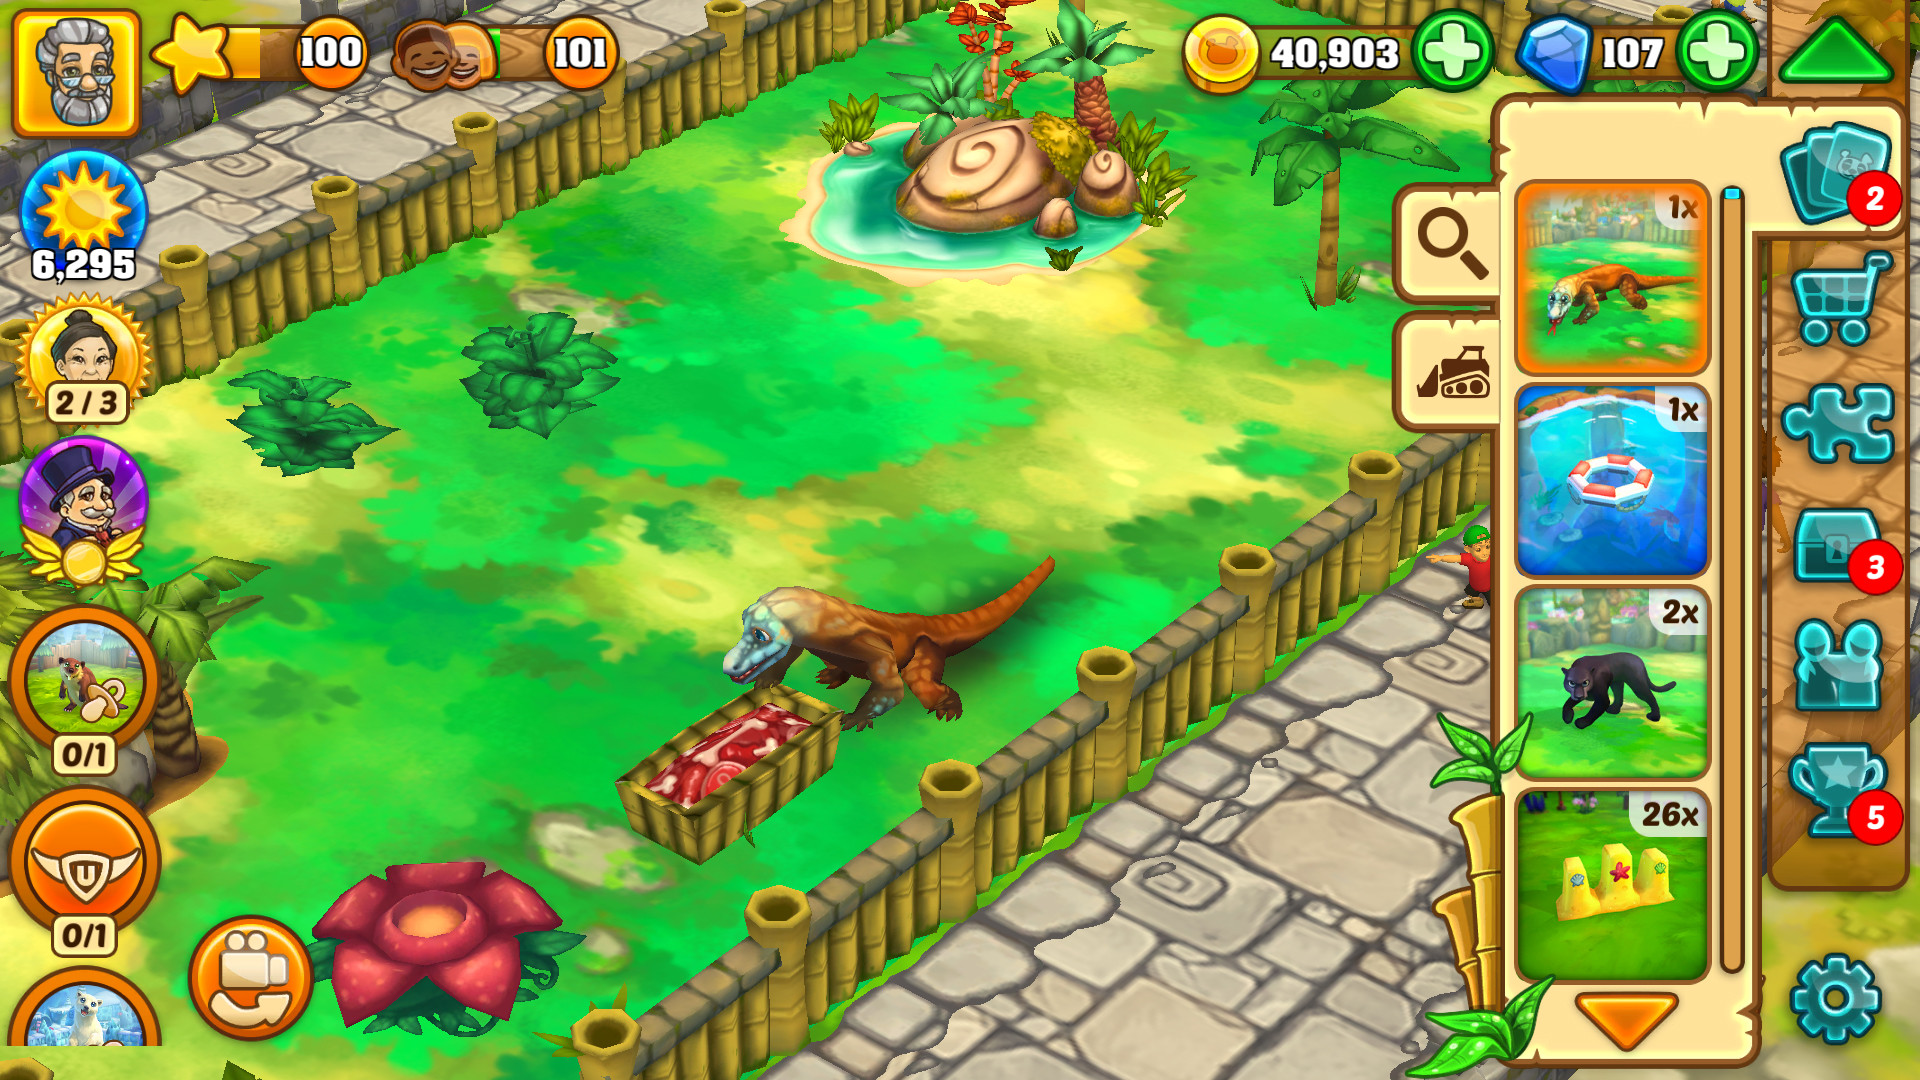 Zoo Life: Animal Park Game instal the last version for mac